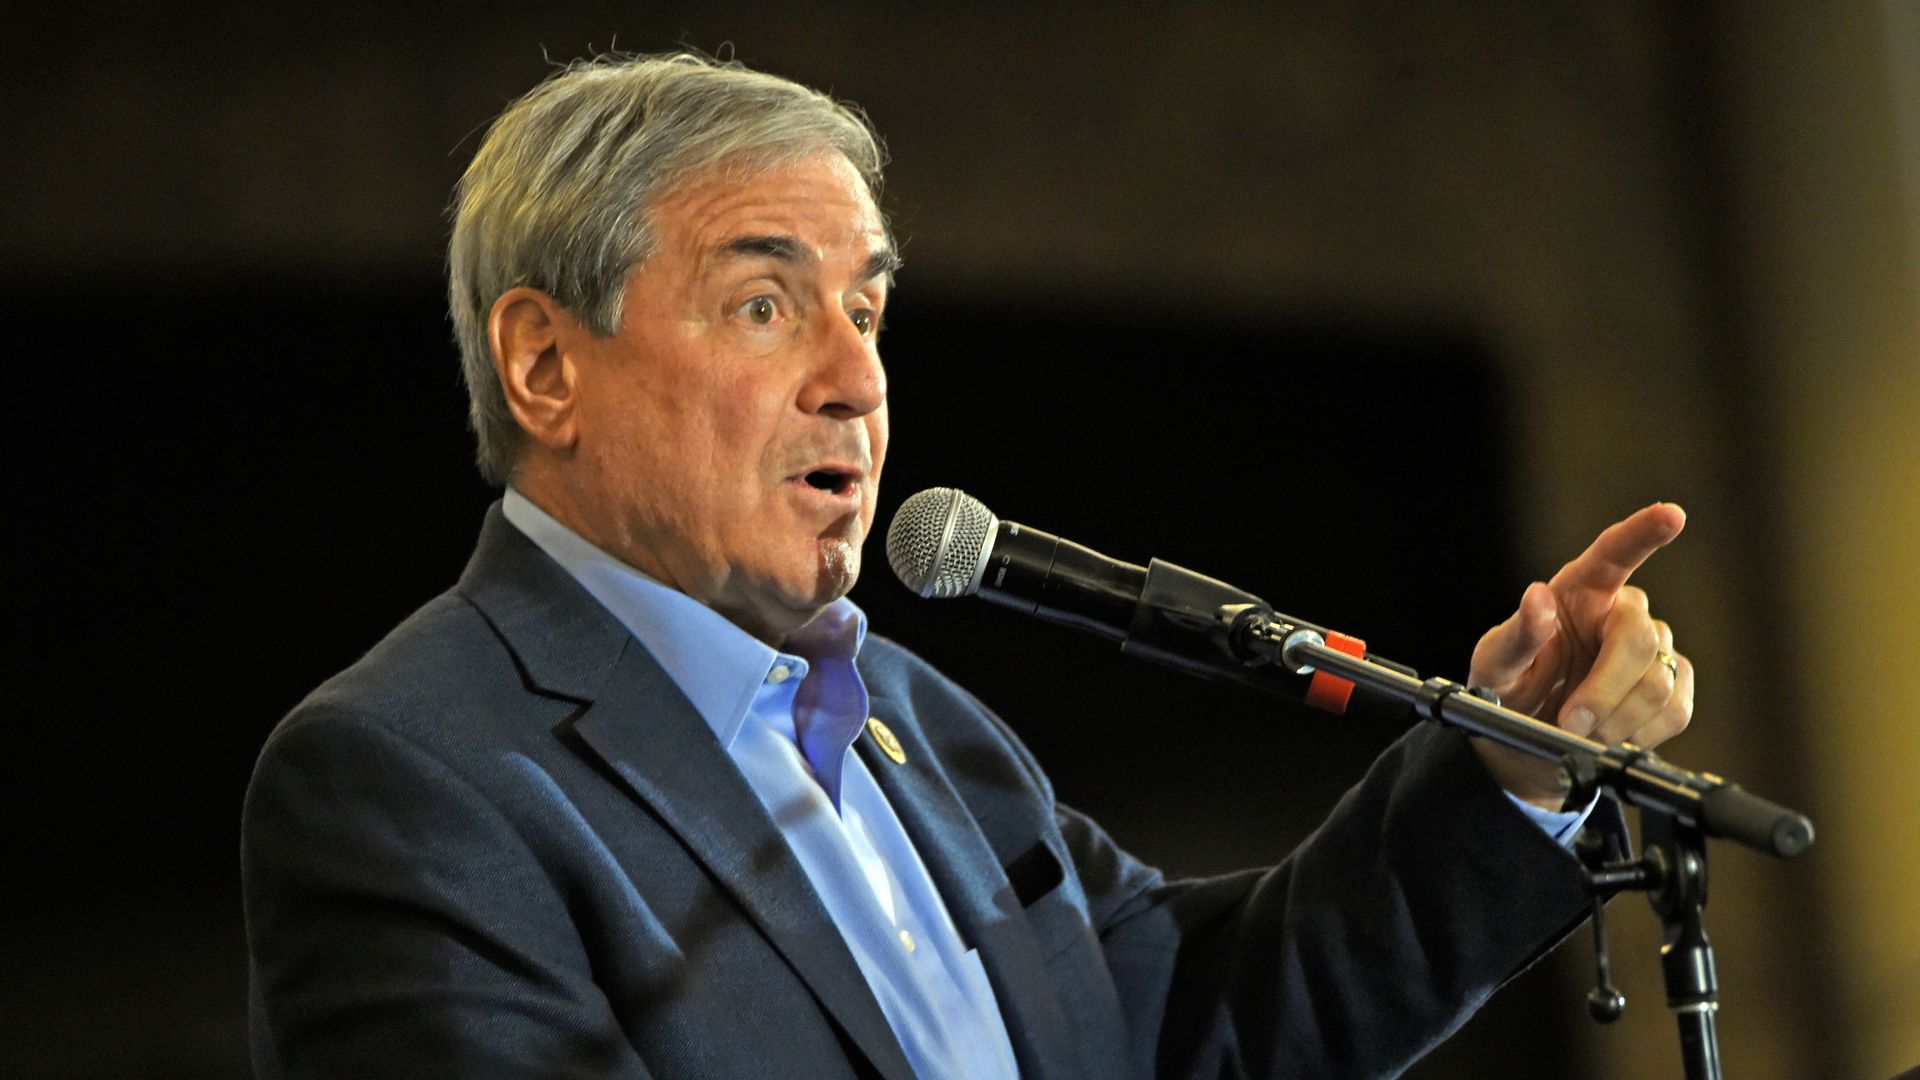  Rep. John Yarmuth speaks during the Protecting Working Families Tour at The Galt House Hotel on December 1, 2017 in Louisville, Kentucky. 